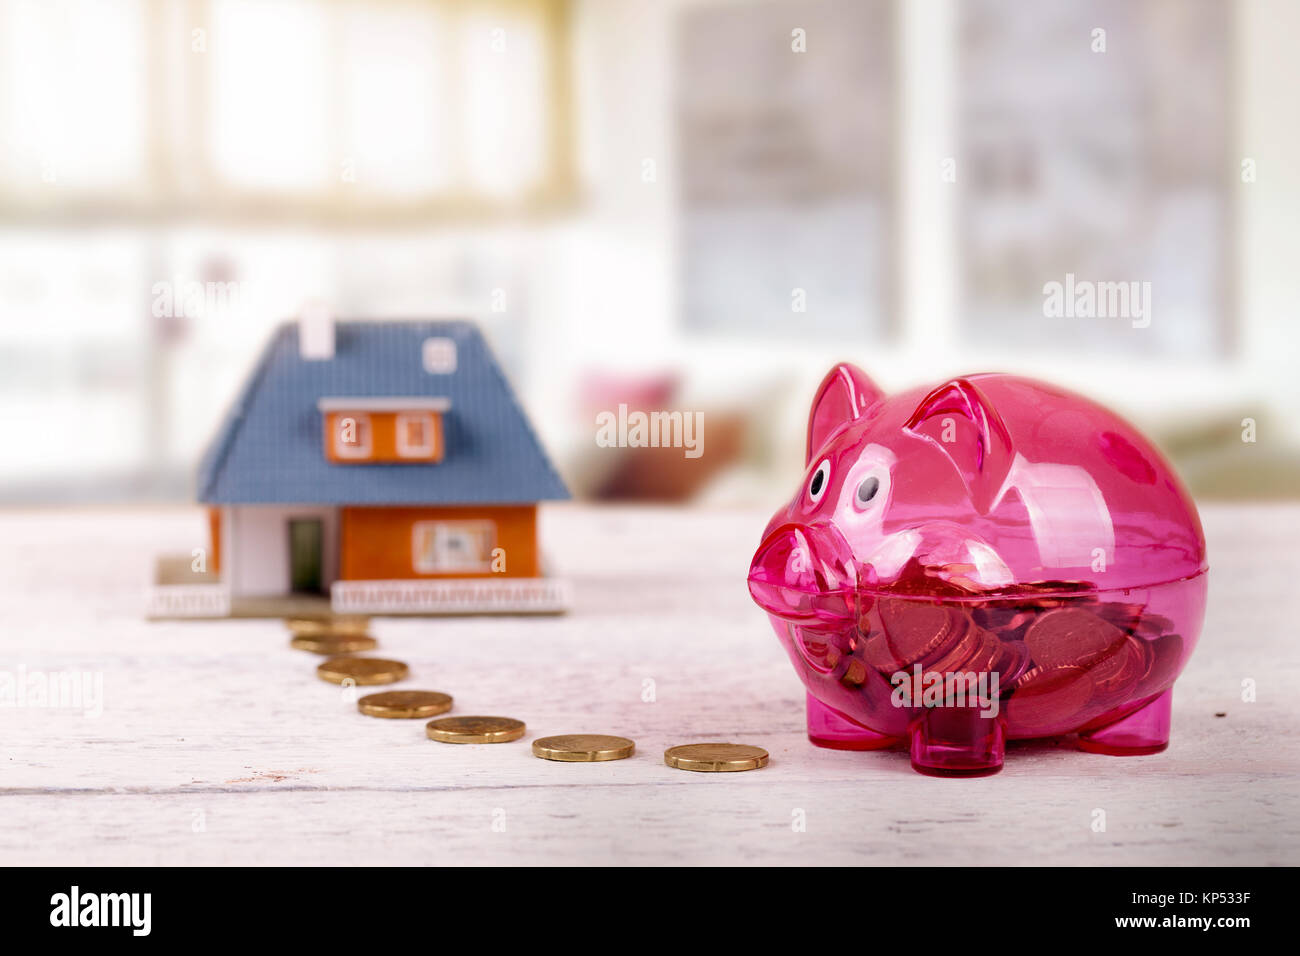 conceptual shot with piggy bank and house scale model on the table in the room Stock Photo